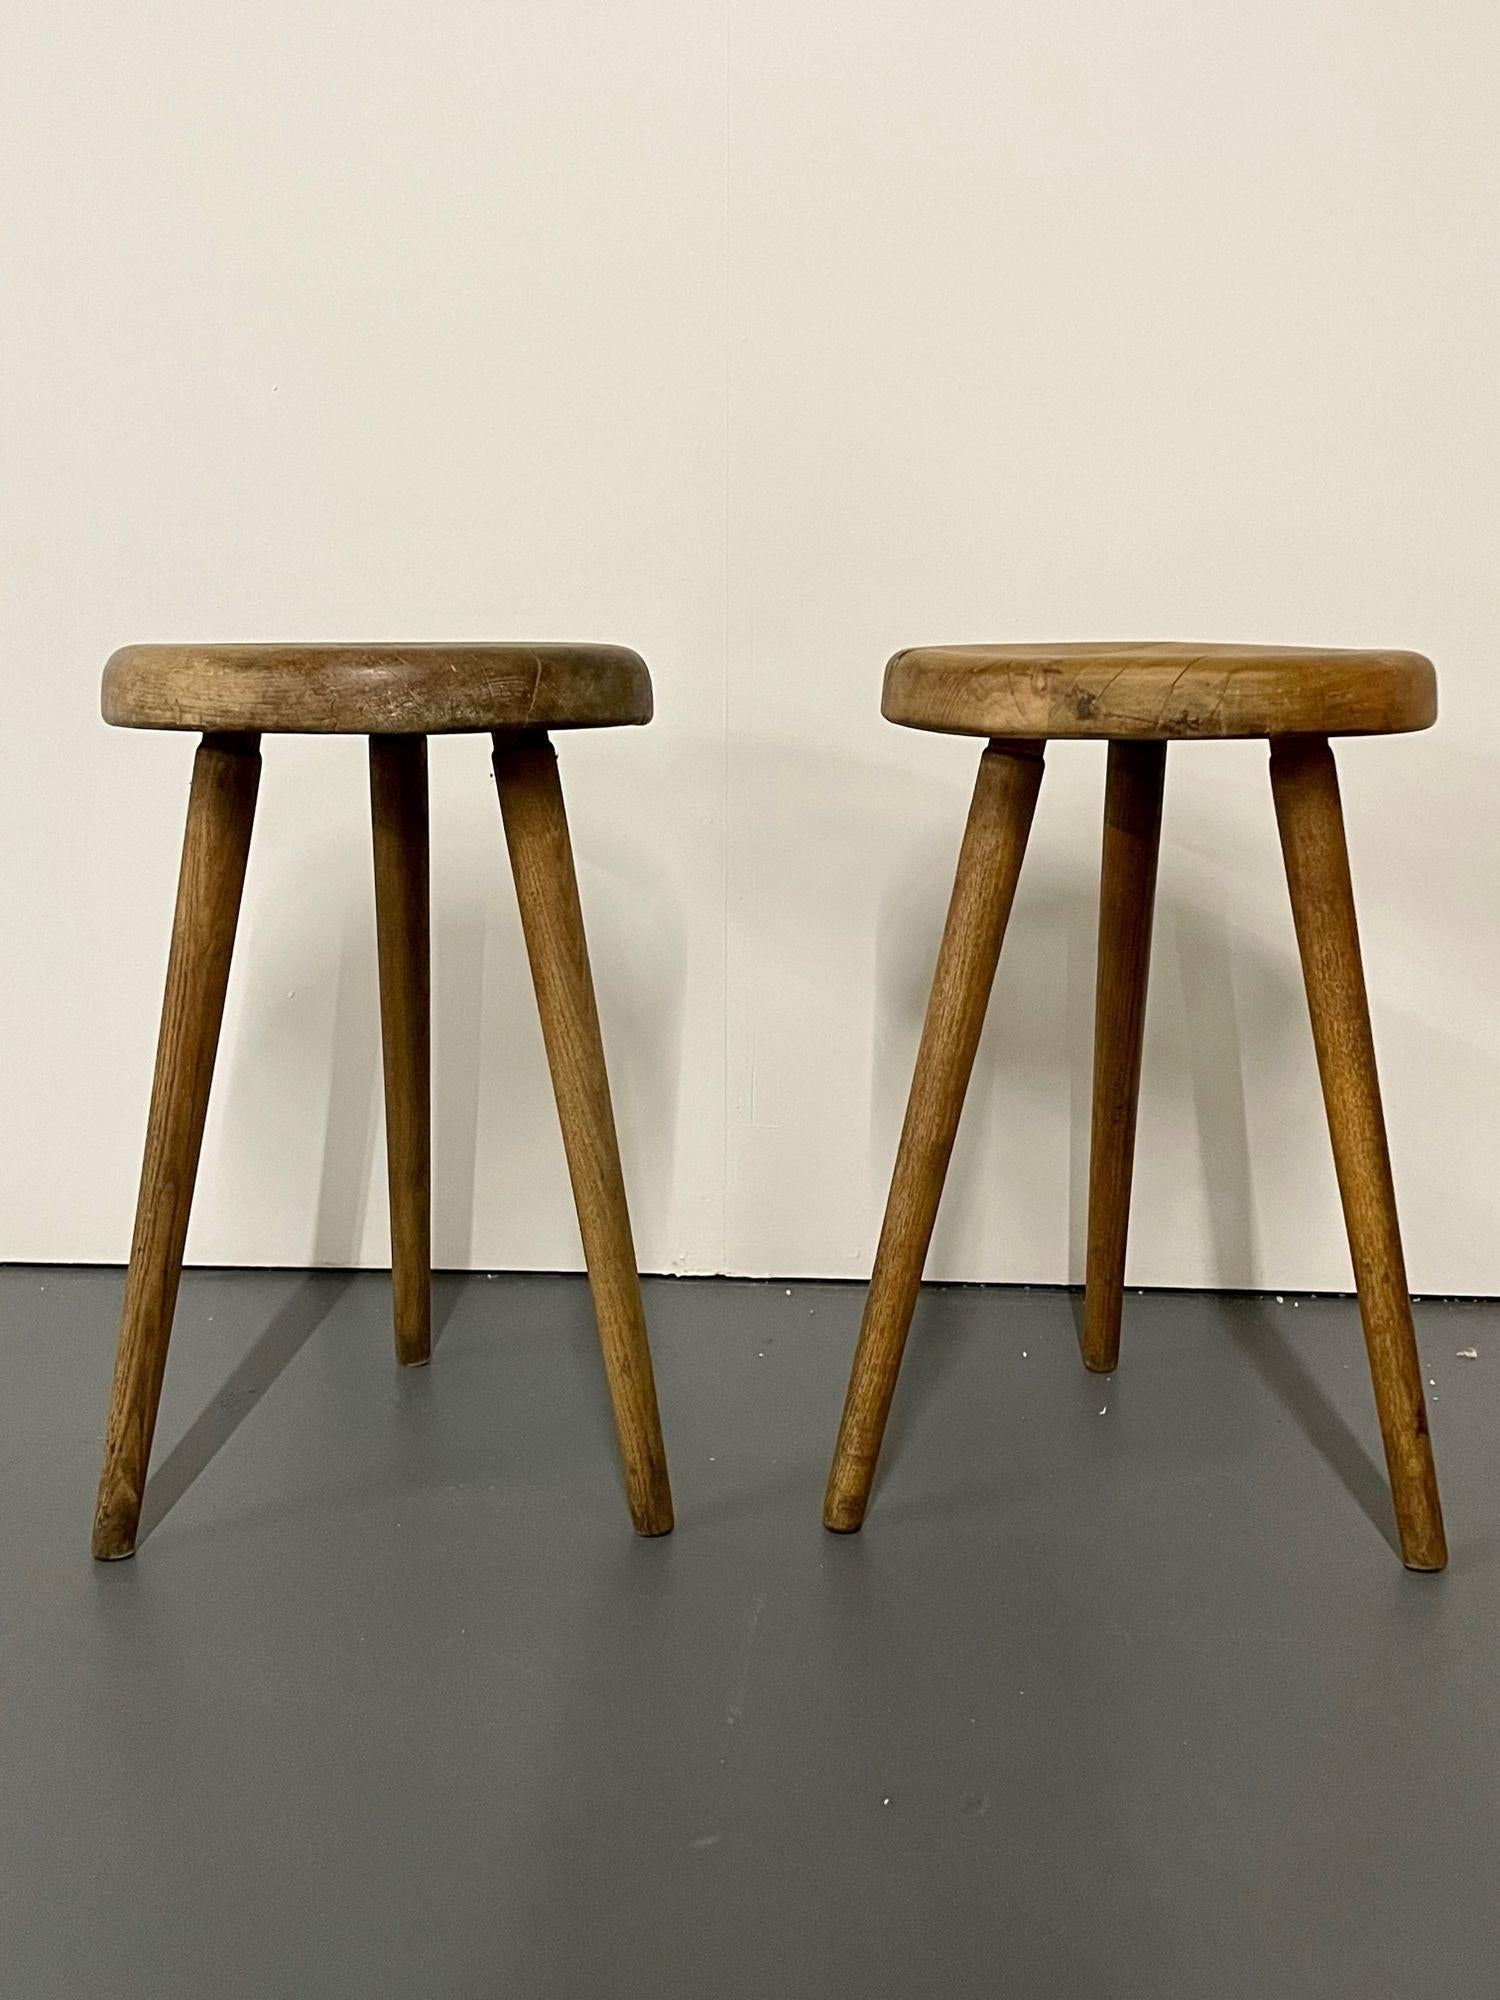 Mid-Century Modern Wooden French Provincial Stools, Charlotte Perriand Style
 
Pair of mid-century wooden stools in elm reminiscent of Charlotte Perriand's design. Perriand initially designed stools for Les Arcs ski restort in France.
 
Other